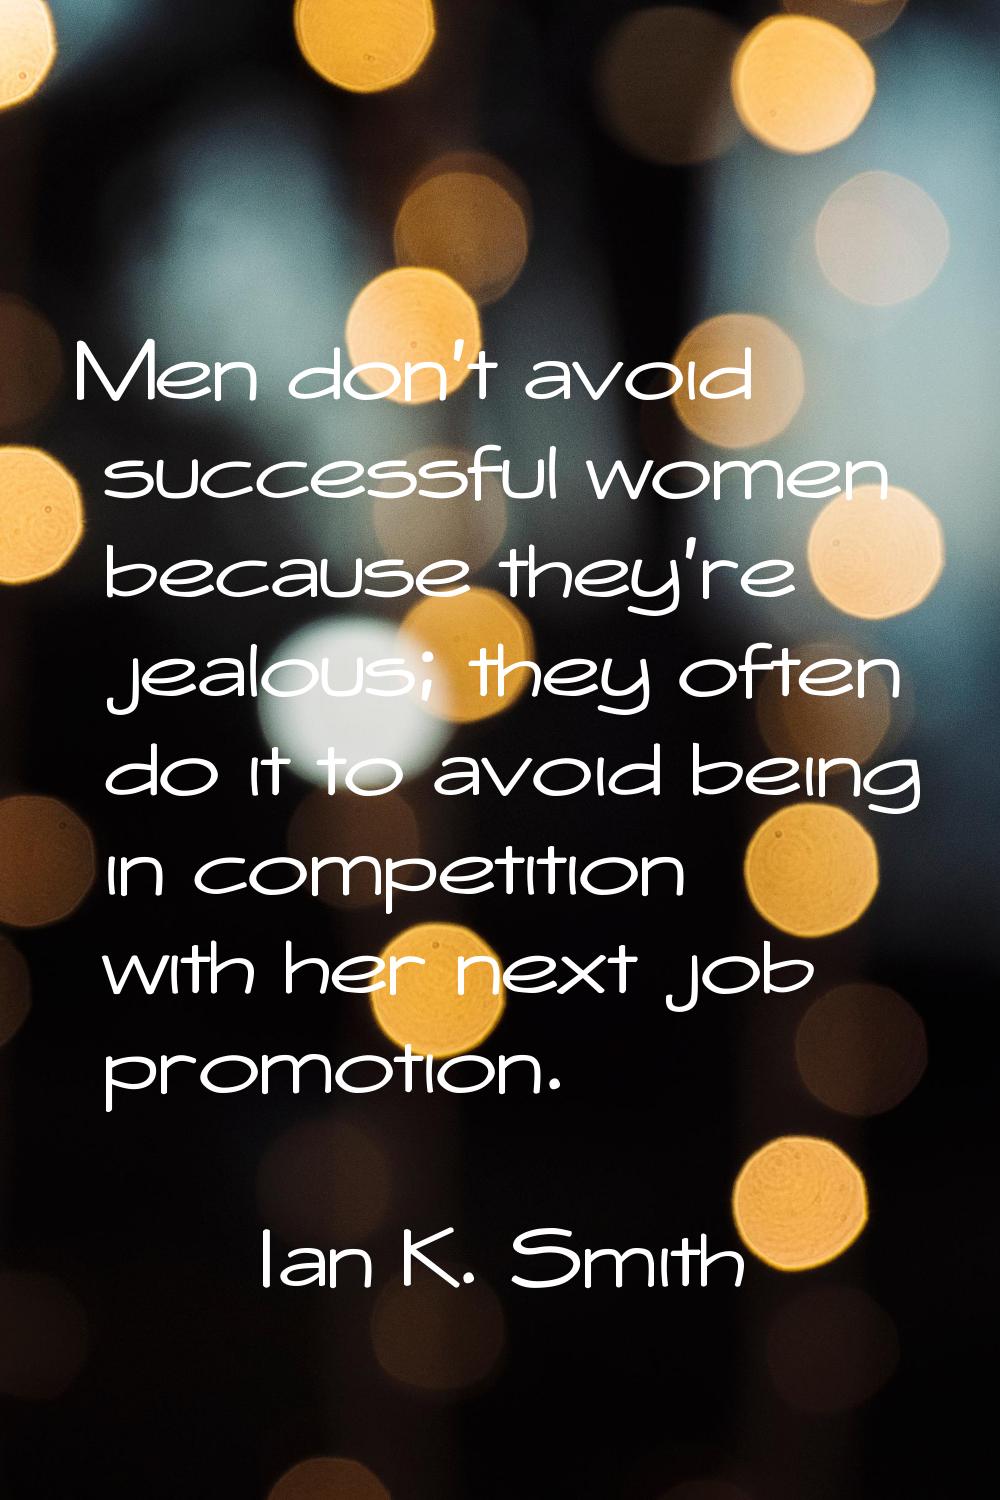 Men don't avoid successful women because they're jealous; they often do it to avoid being in compet